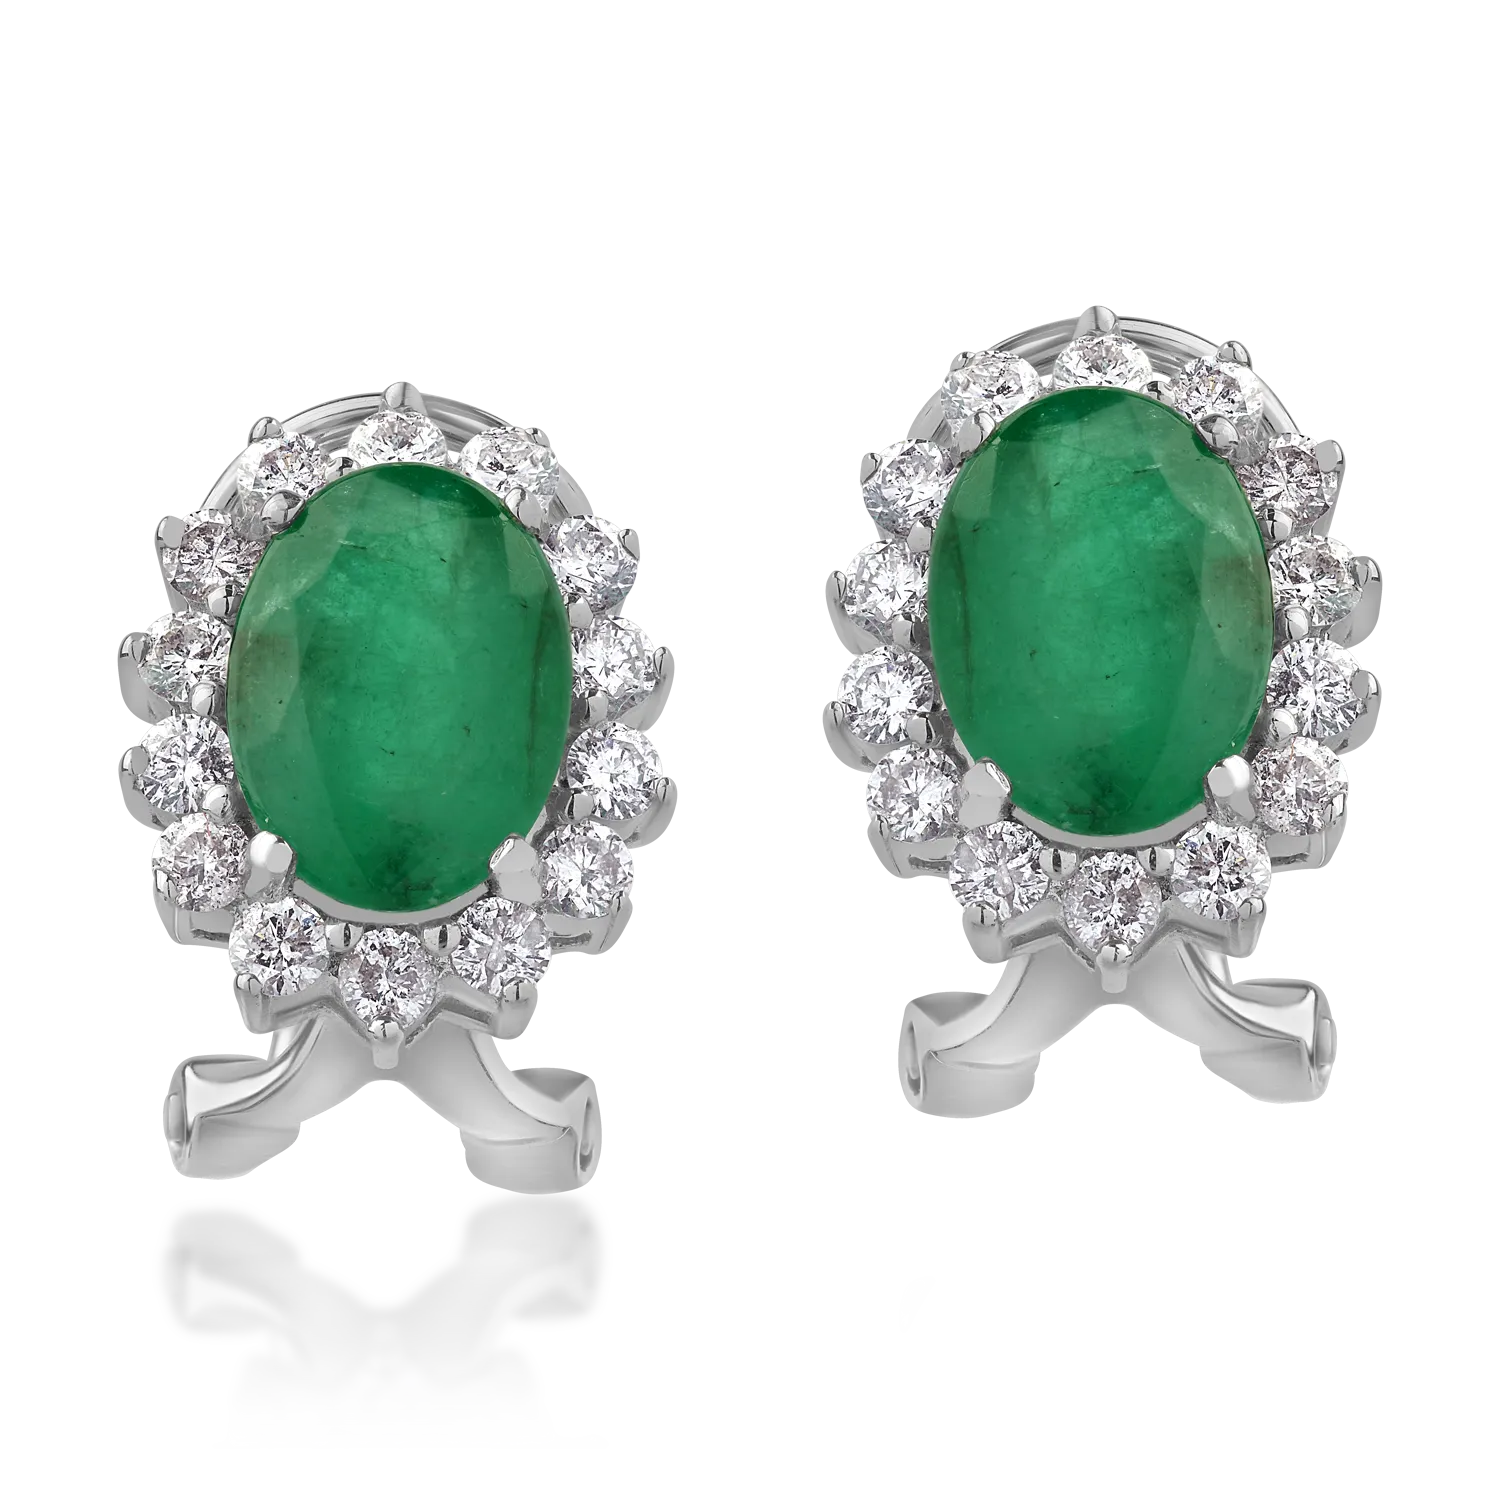 18K white gold earrings with 2.17ct emeralds and 0.61ct diamonds